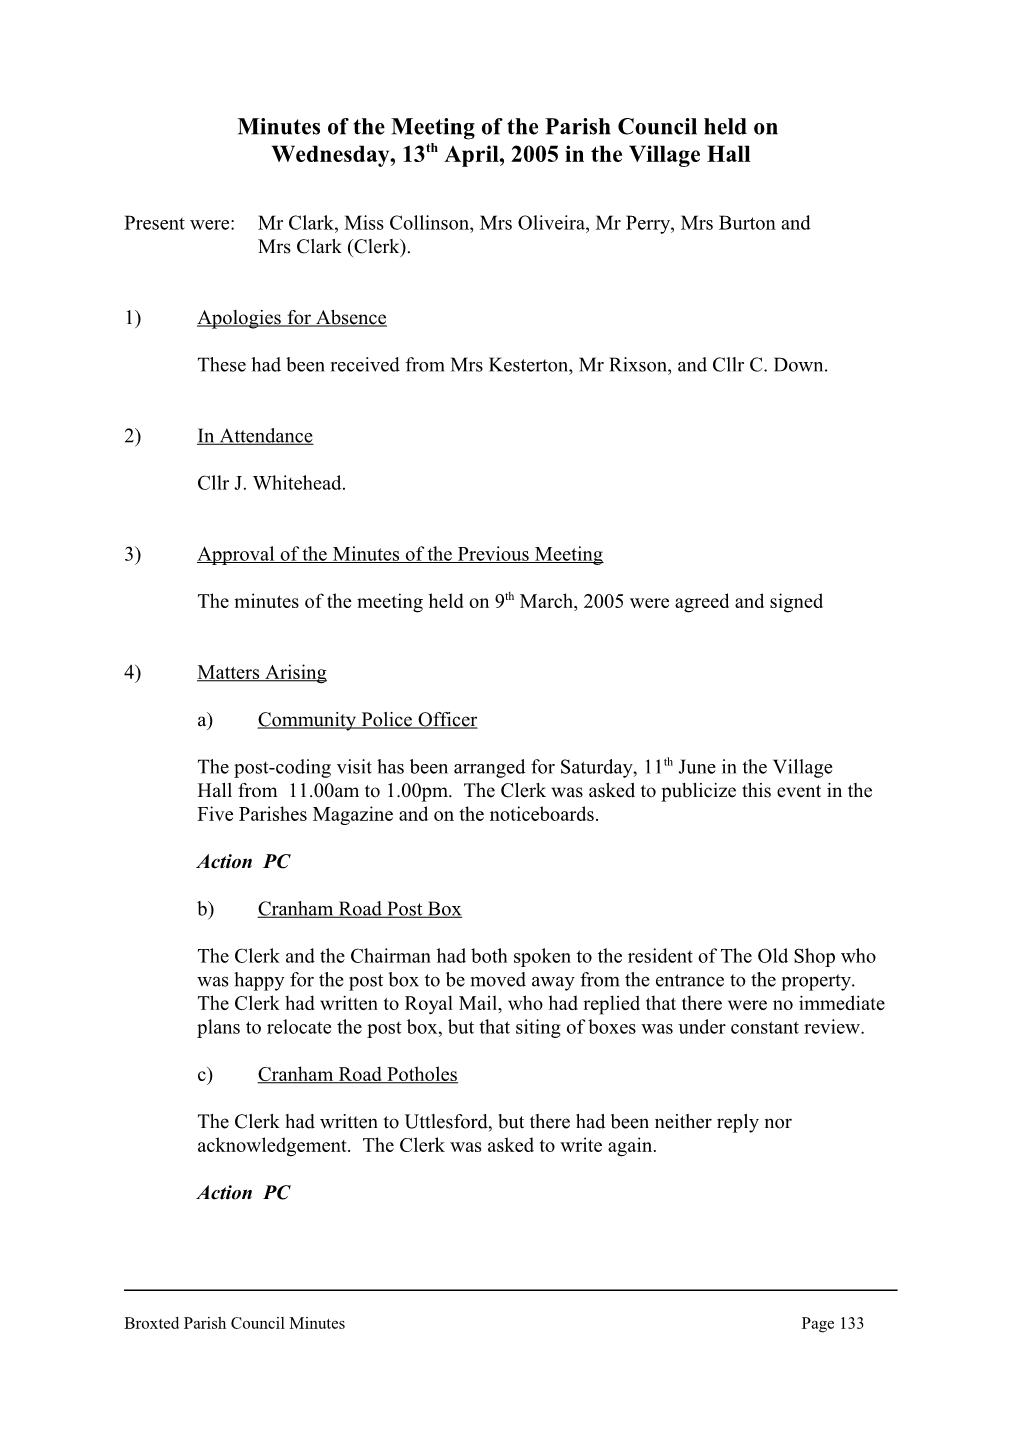 Minutes of the Meeting of the Parish Council Held On